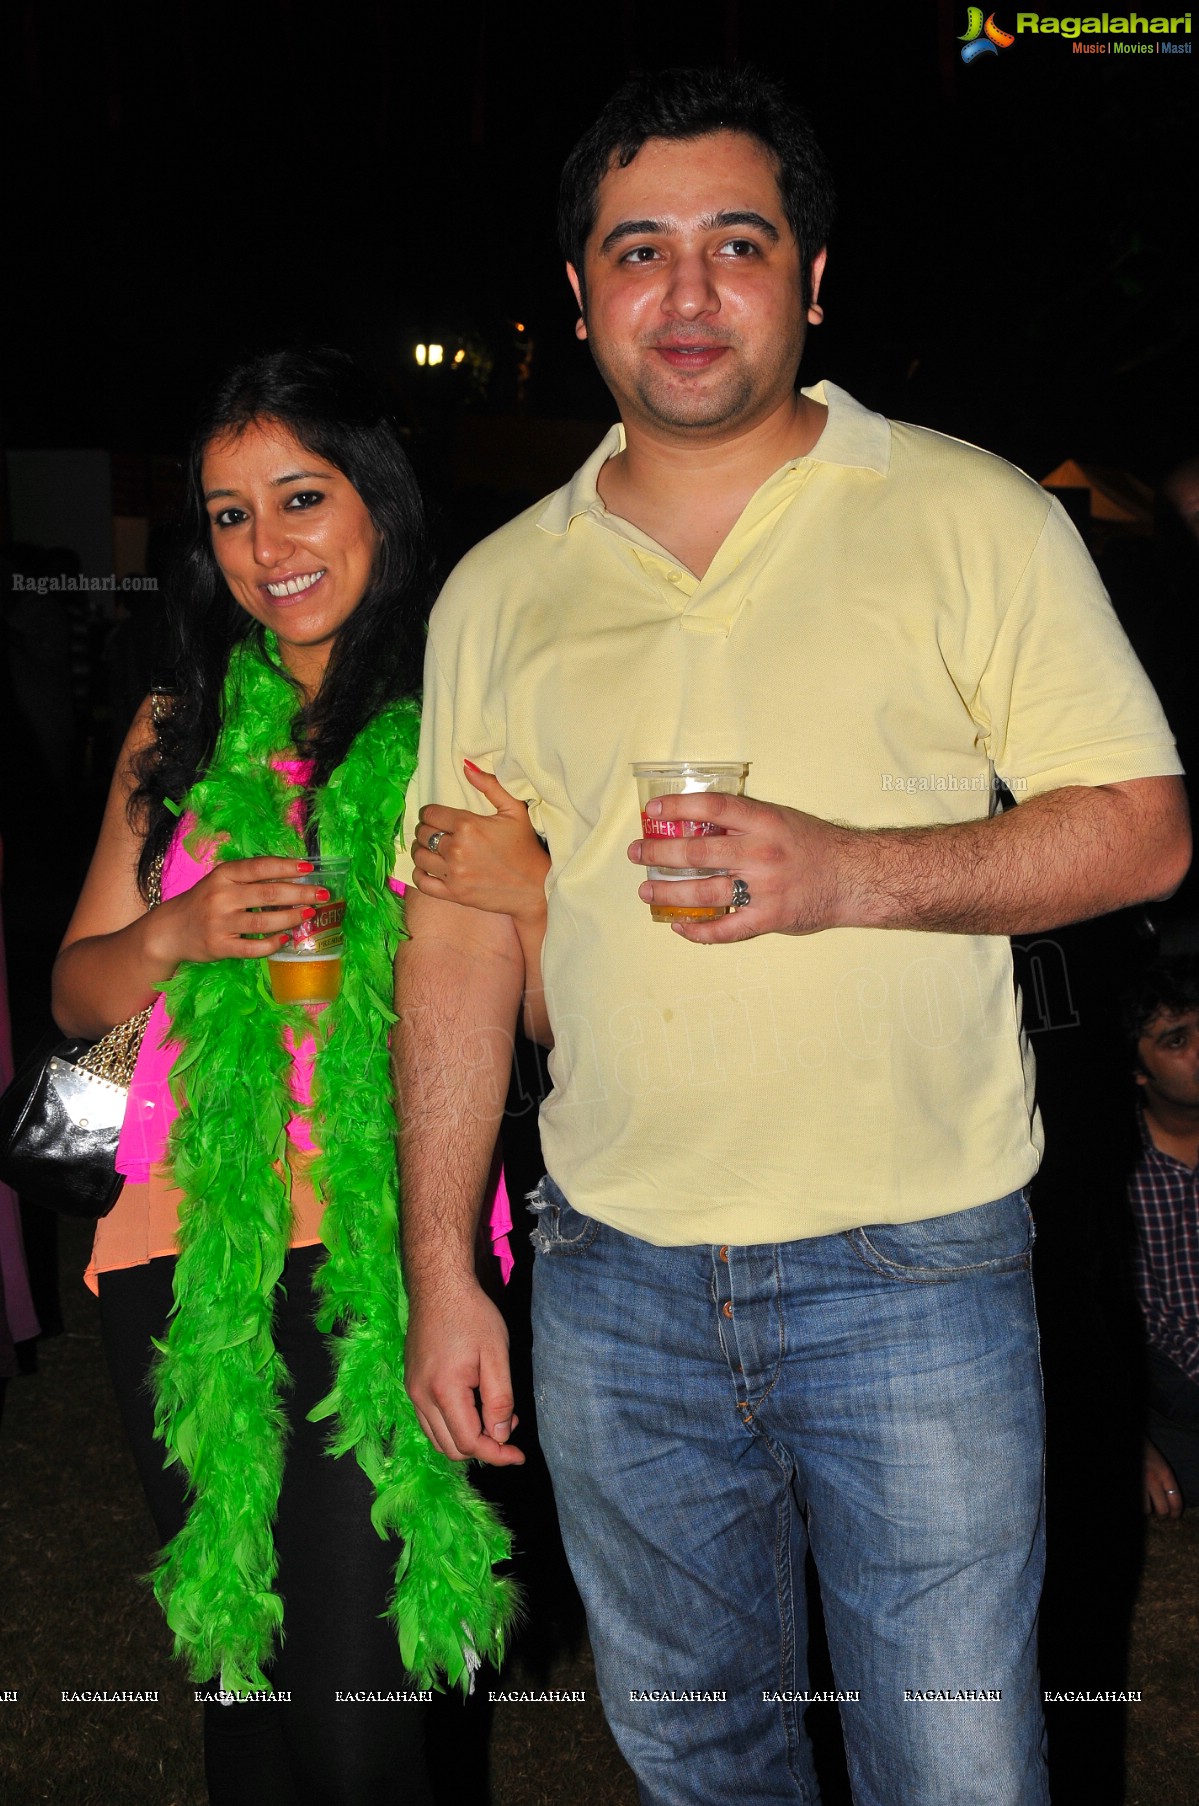 Kingfisher Premium – The Great Indian Octoberfest 2012, Hyderabad (Day 3)